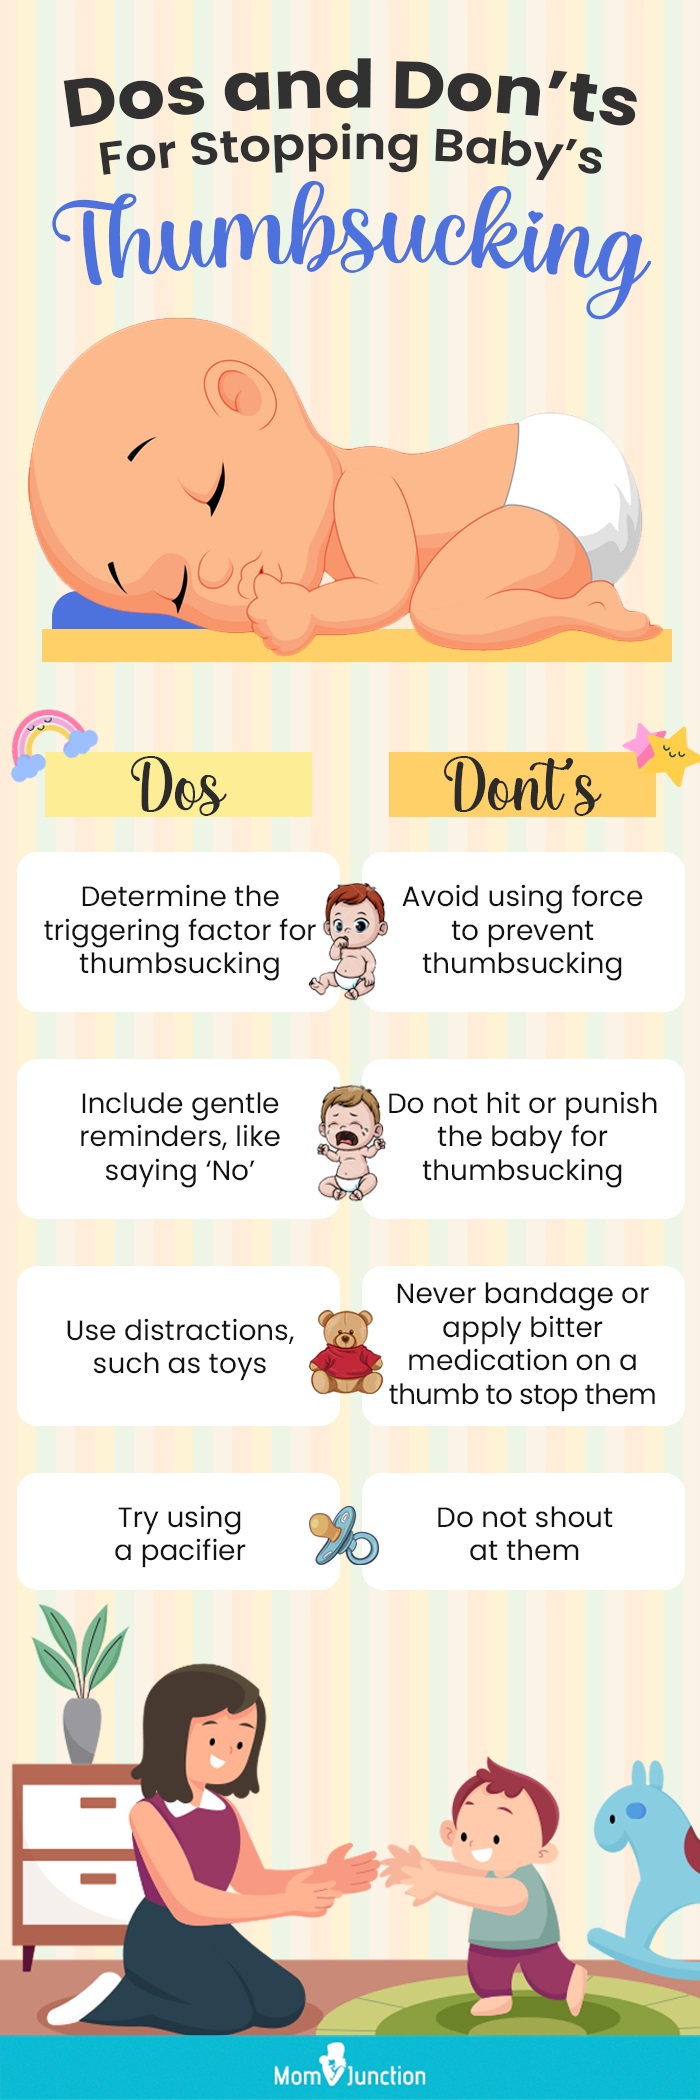 dos and donts for stopping babys thumbsucking (infographic)